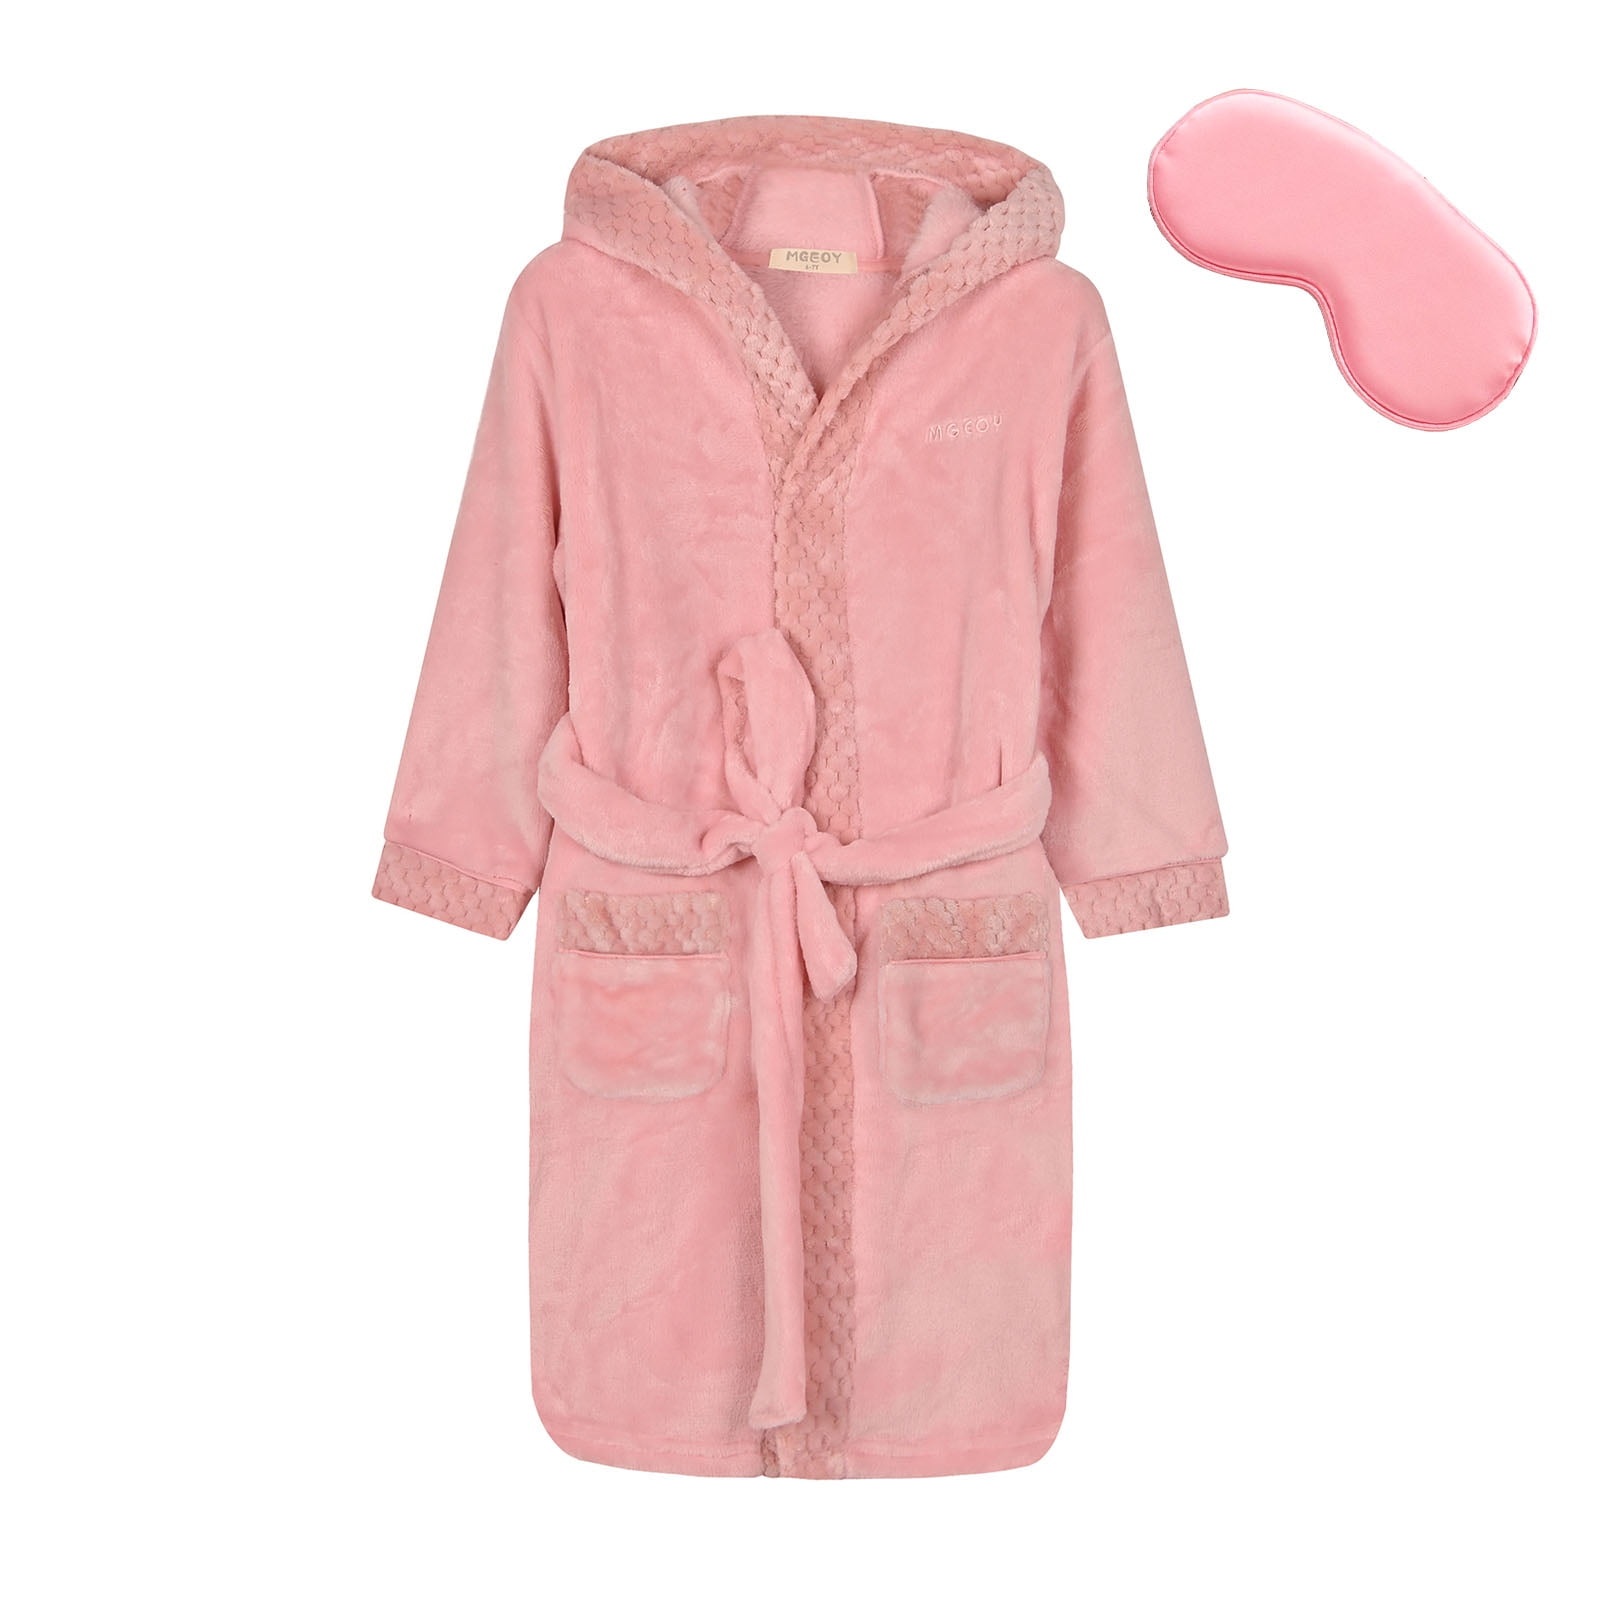 MGEOY Boys Girls Robe Soft Hooded Flannel Bathrobes for Kids With Silk ...